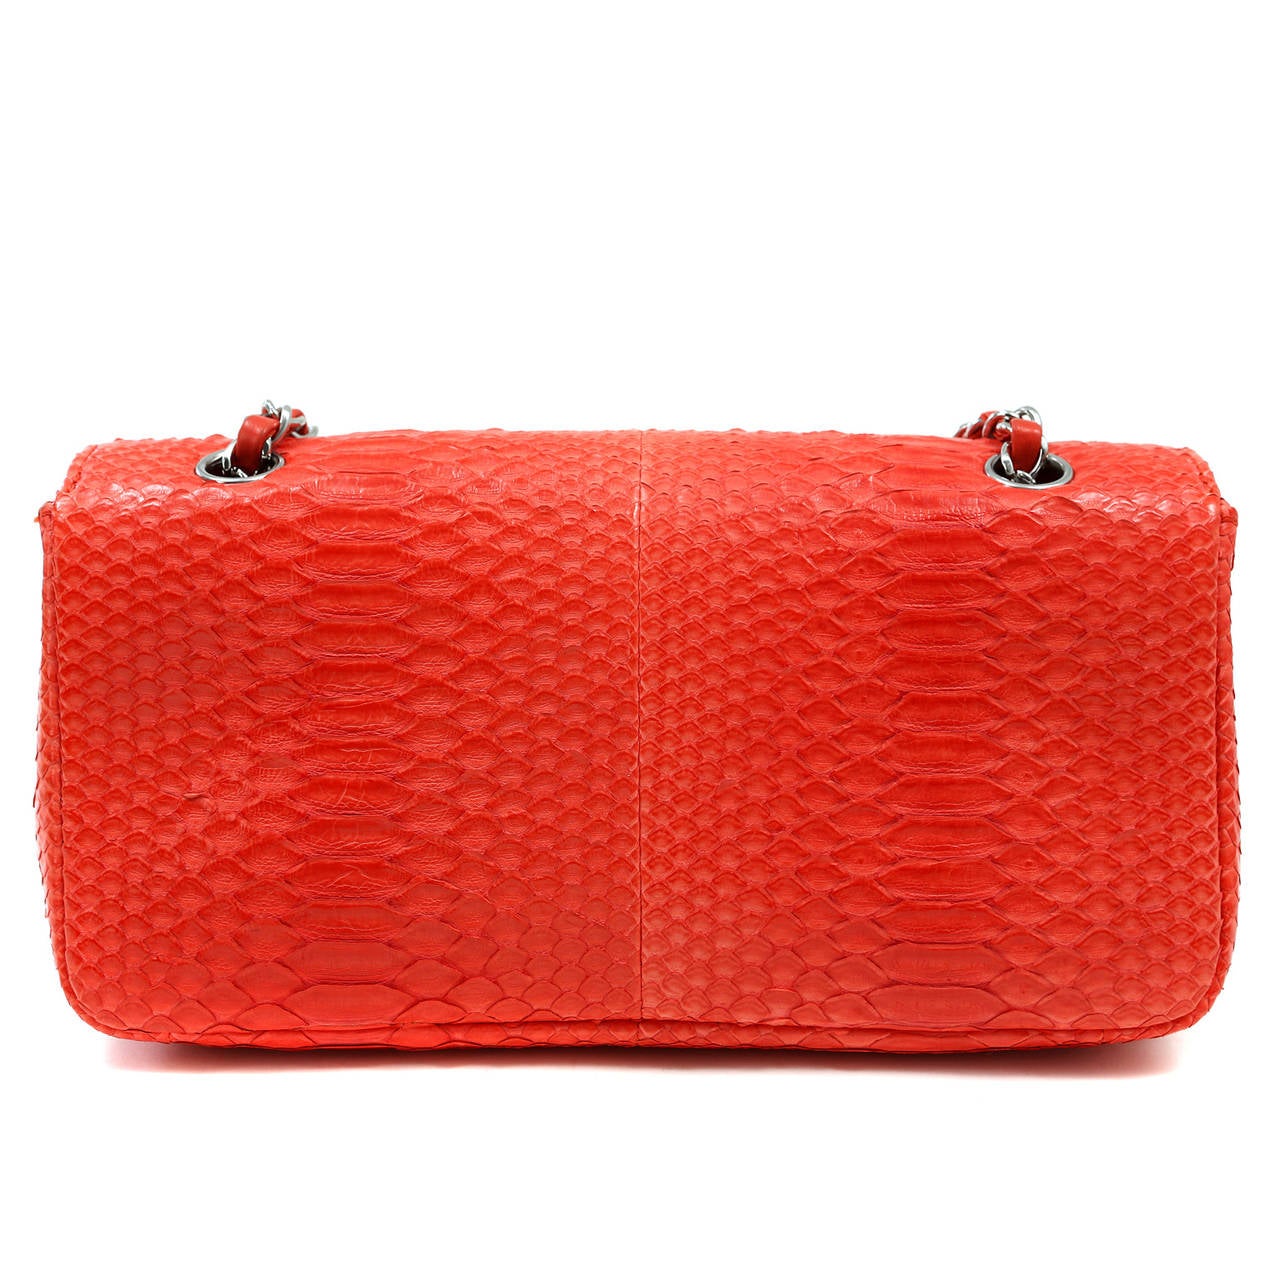 Chanel Coral Python Classic Flap Bag

Pristine condition, medium size, silver hardware.  A collectible exotic Chanel in fiery coral.
 
Bright coral python skin flap bag has silver interlocking CC twist lock securing the front flap.  Coordinating